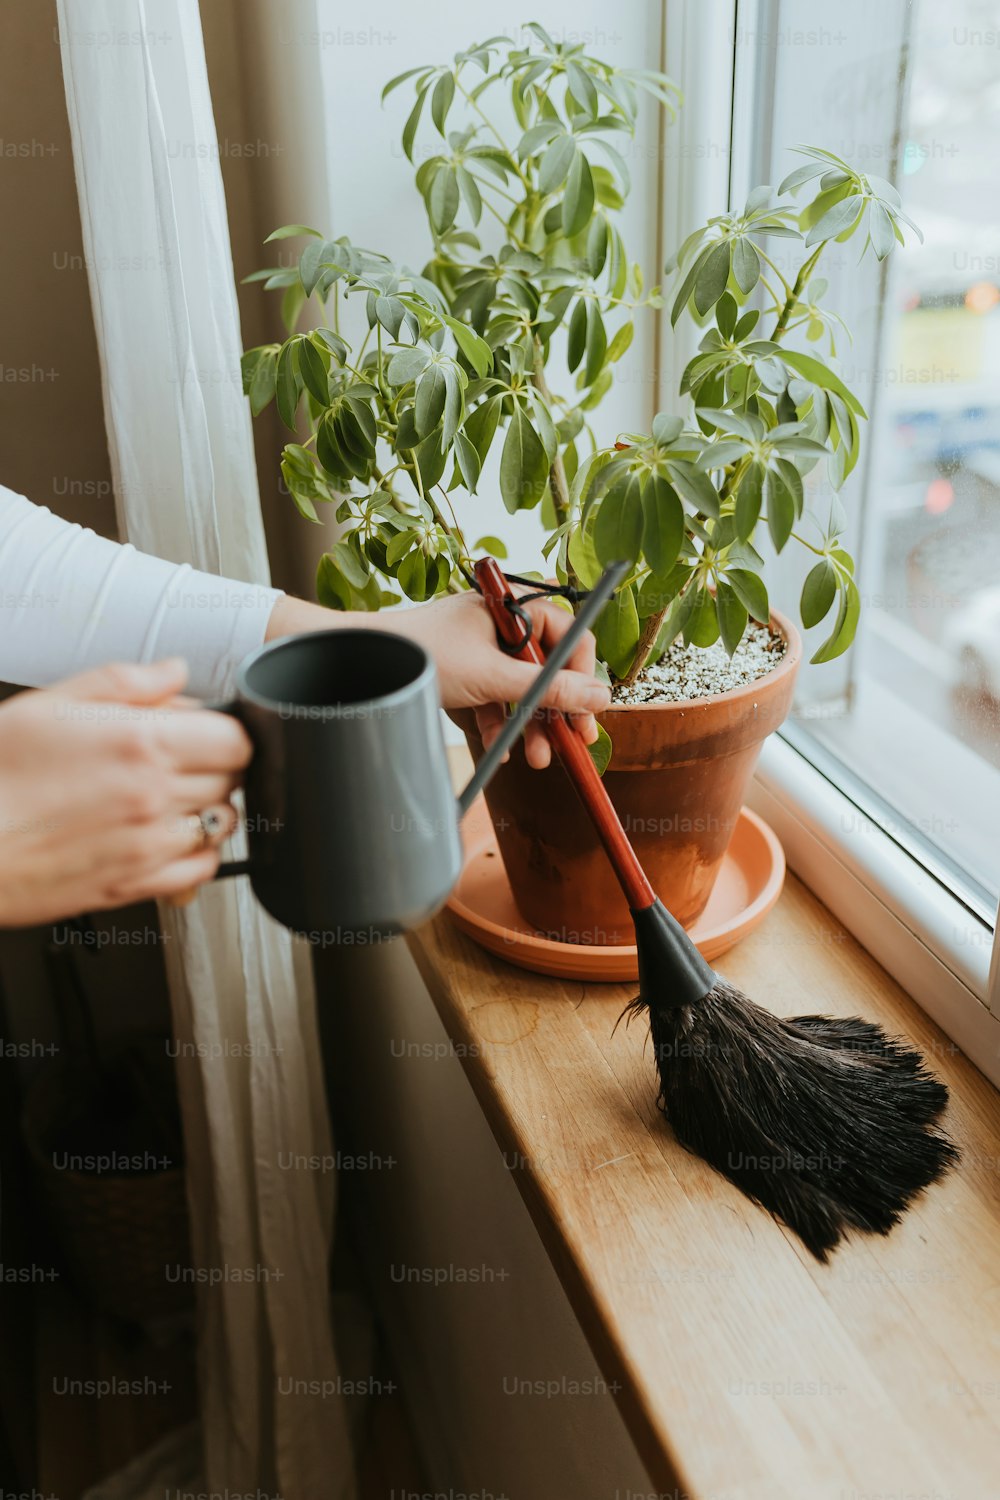 a woman is holding a cup and a broom